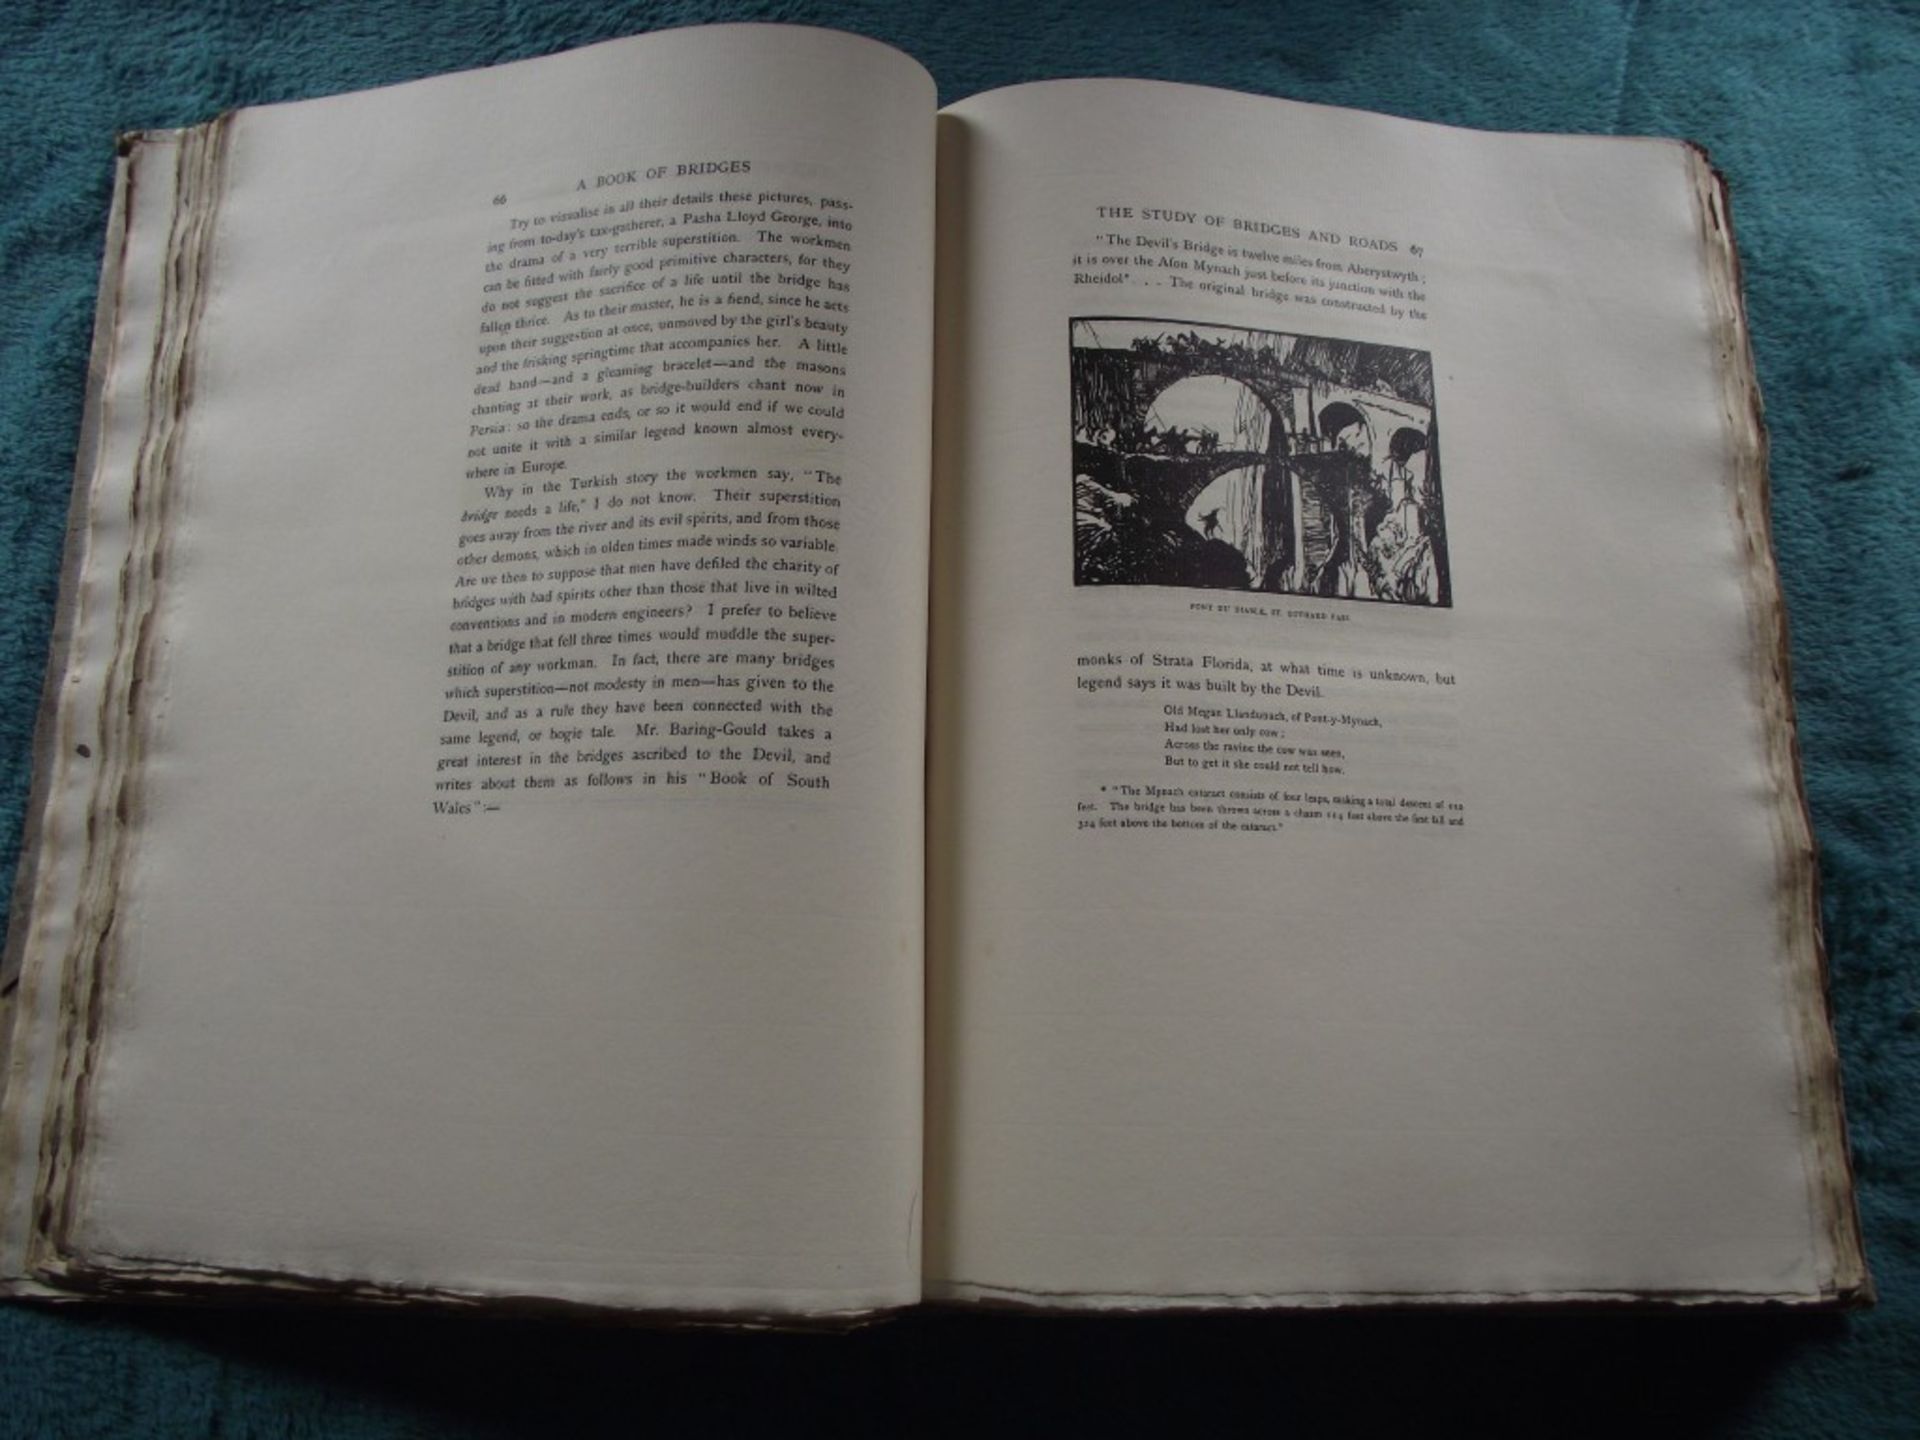 A Book of Bridges by Frank Brangwyn & Walter Shaw Sparrow - Ltd. Edit. 17/75 with Signed Lithograph. - Image 24 of 64